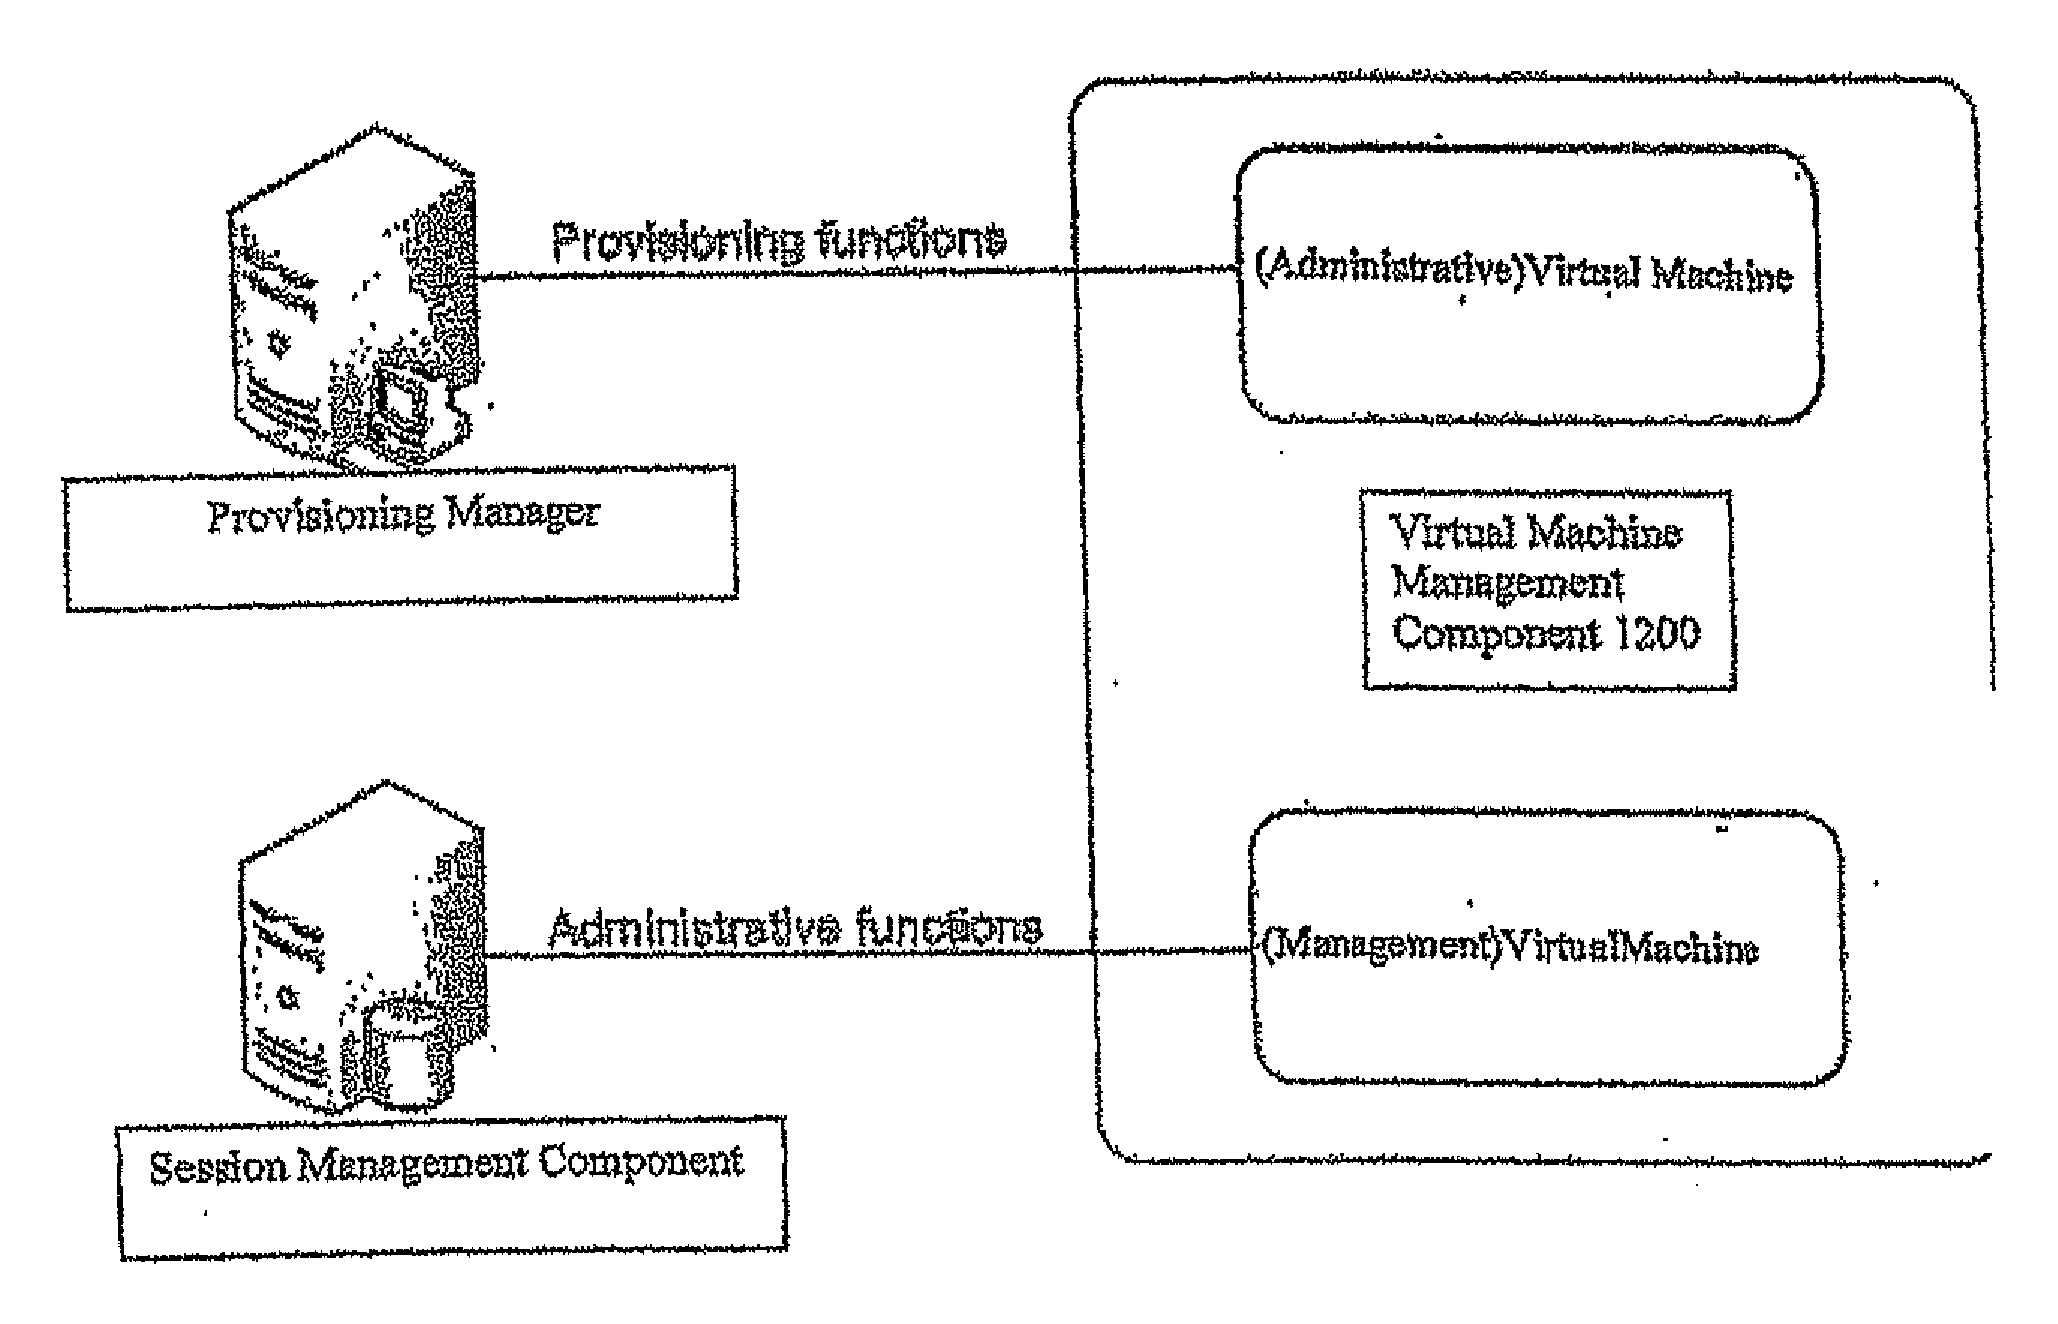 Methods and systems for interacting, via a hypermedium page, with a virtual machine